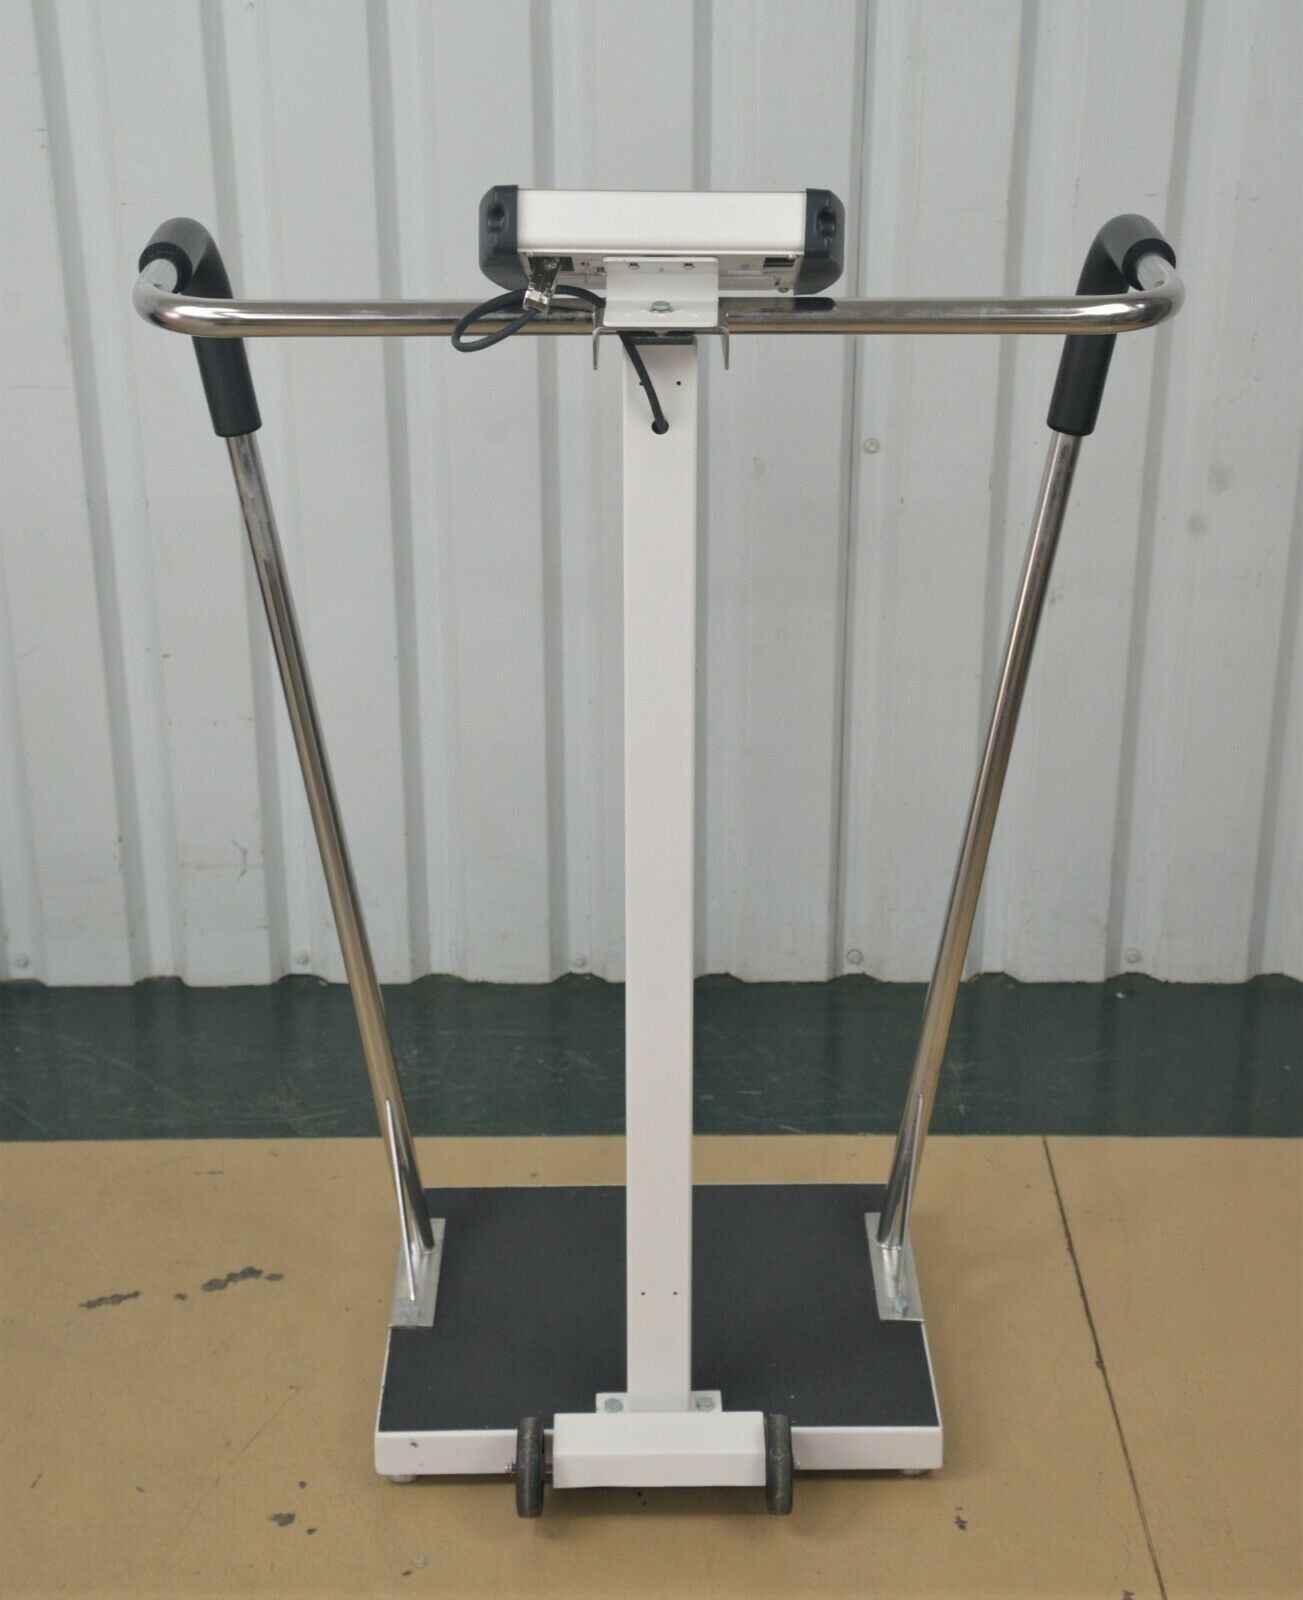 https://www.rhinotradellc.com/wp-content/uploads/imported/7/Cardinal-Detecto-758C-Digital-Waist-High-Stand-On-Bariatric-Scale-6854DHR-234426285027-8.JPG